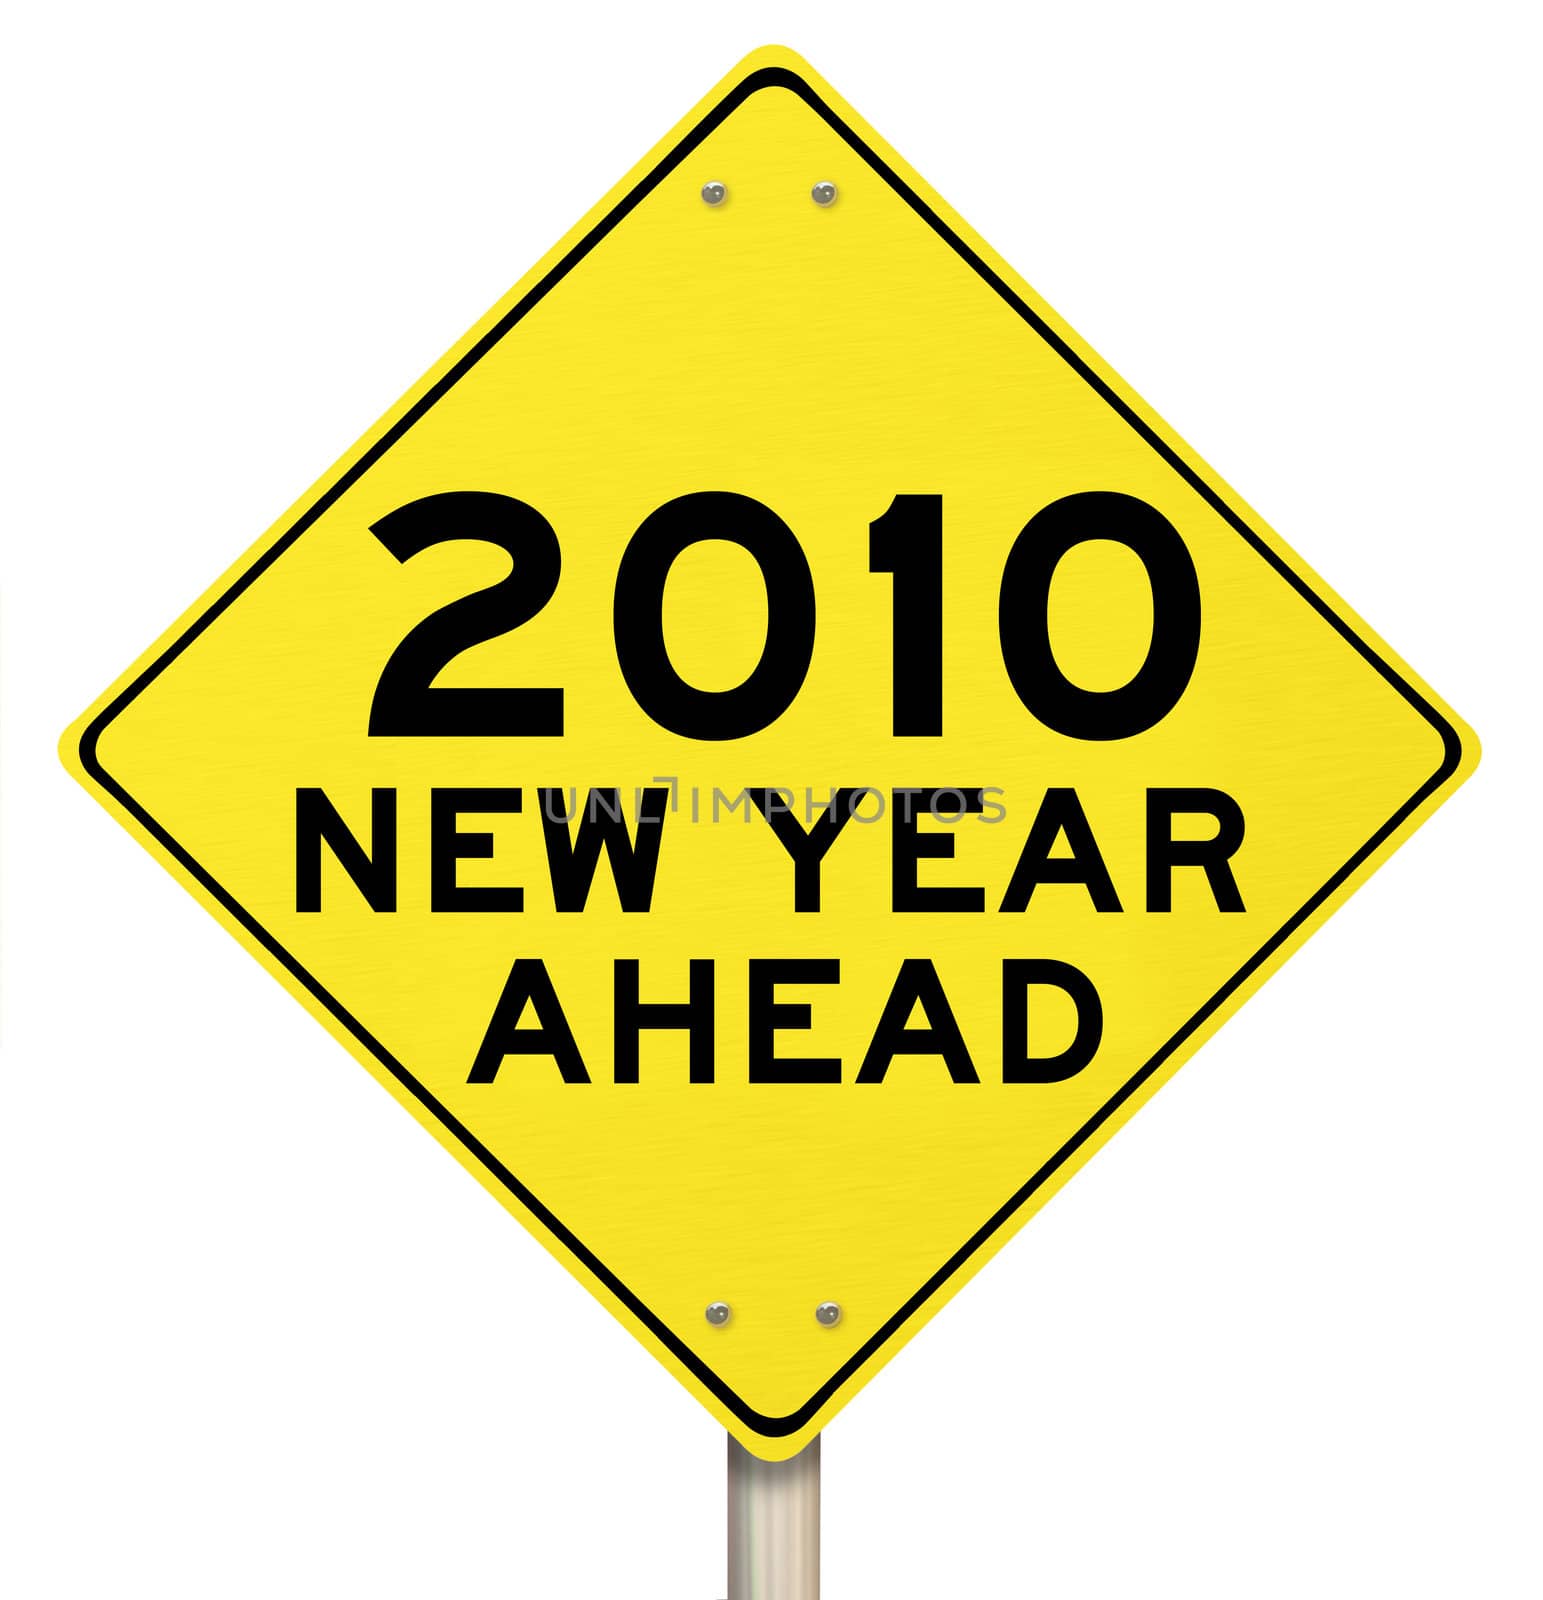 A yellow diamond-shaped road sign reading 2010 New Year Ahead